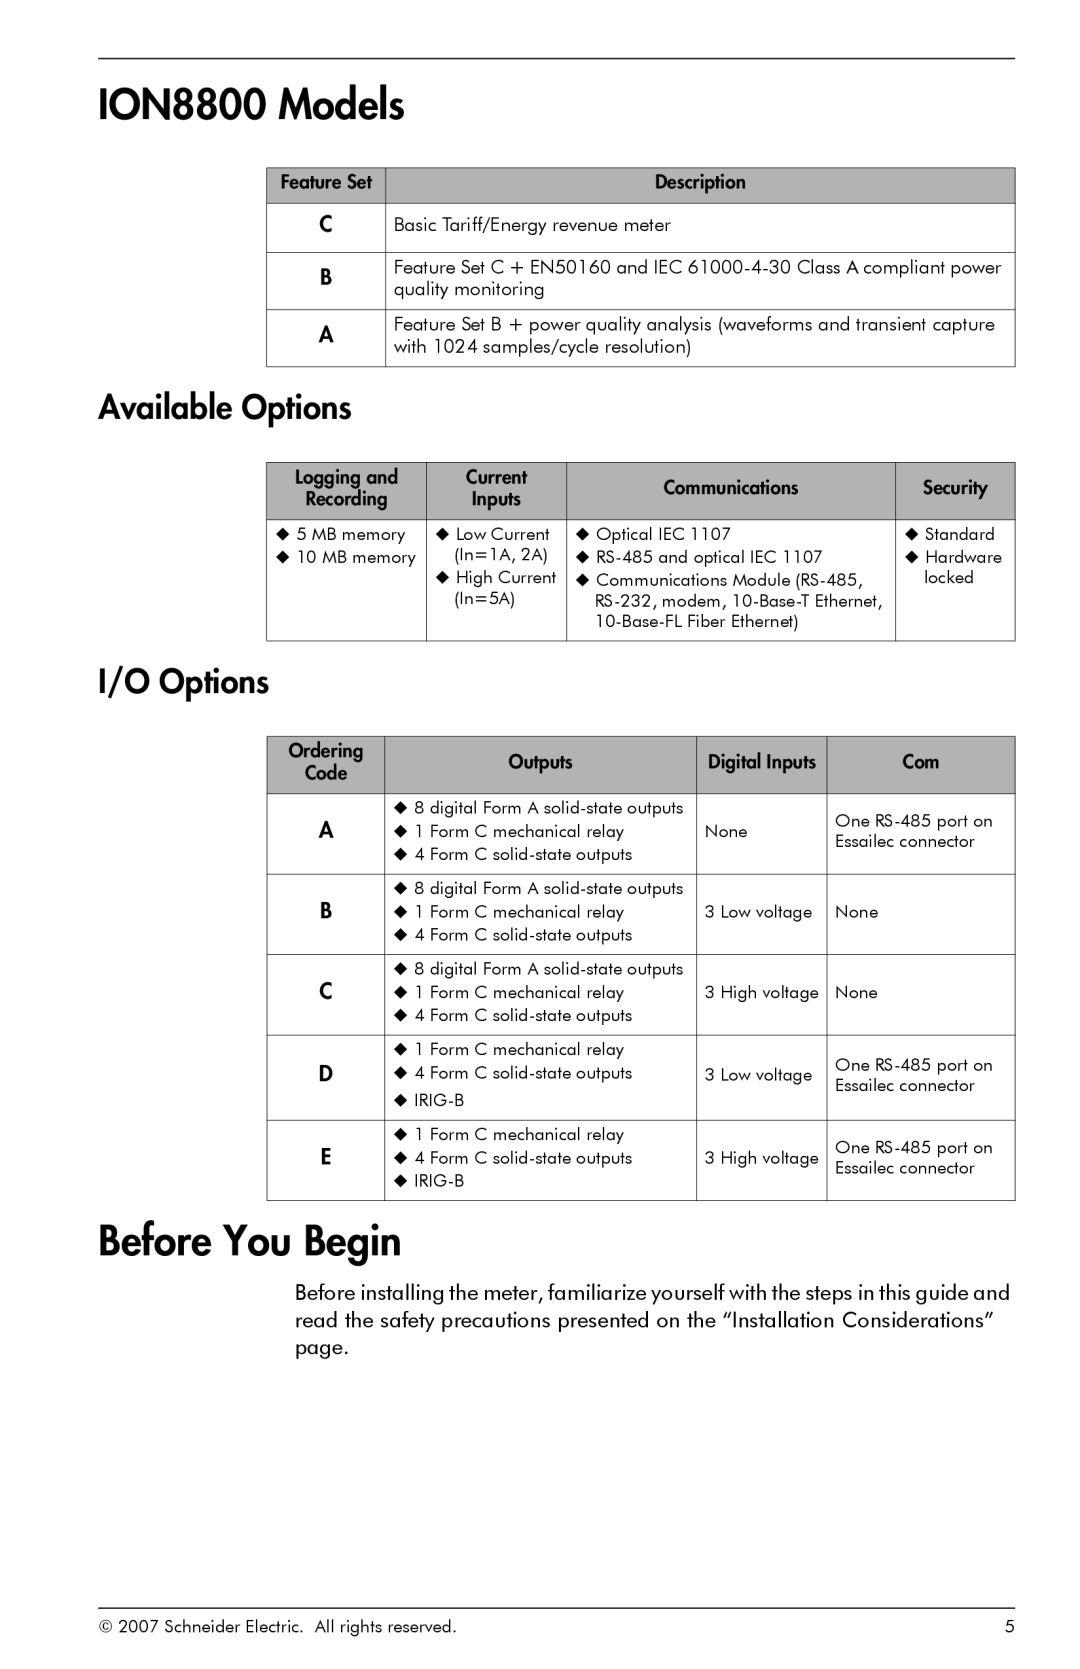 Schneider Electric manual ION8800 Models, Before You Begin, Available Options, I/O Options 